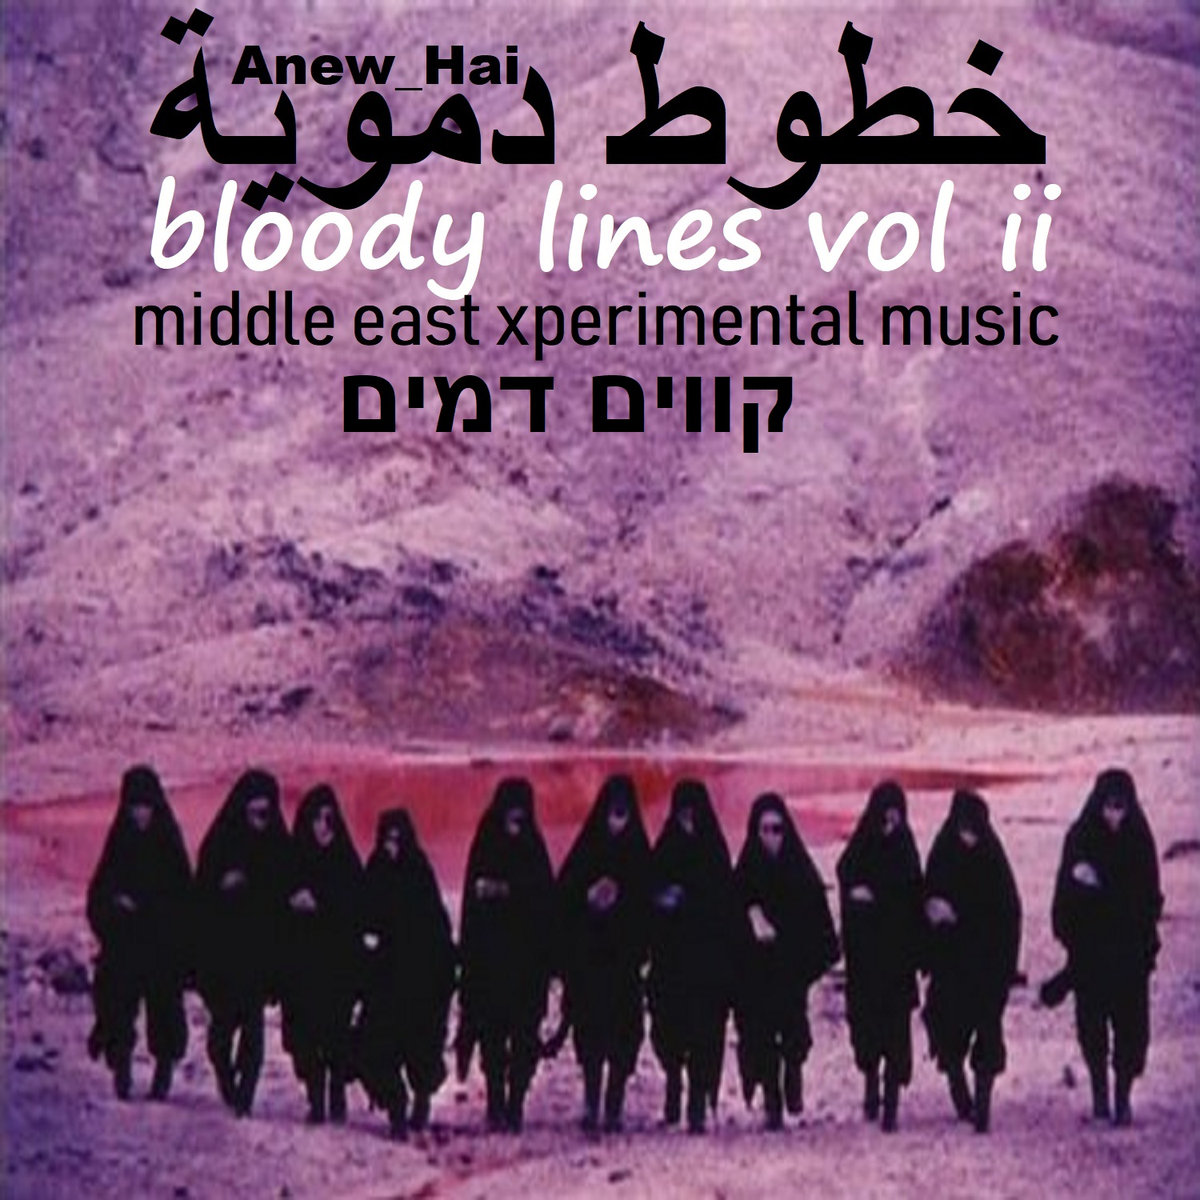 Bloody Lines vol II (experimental music from middle east)